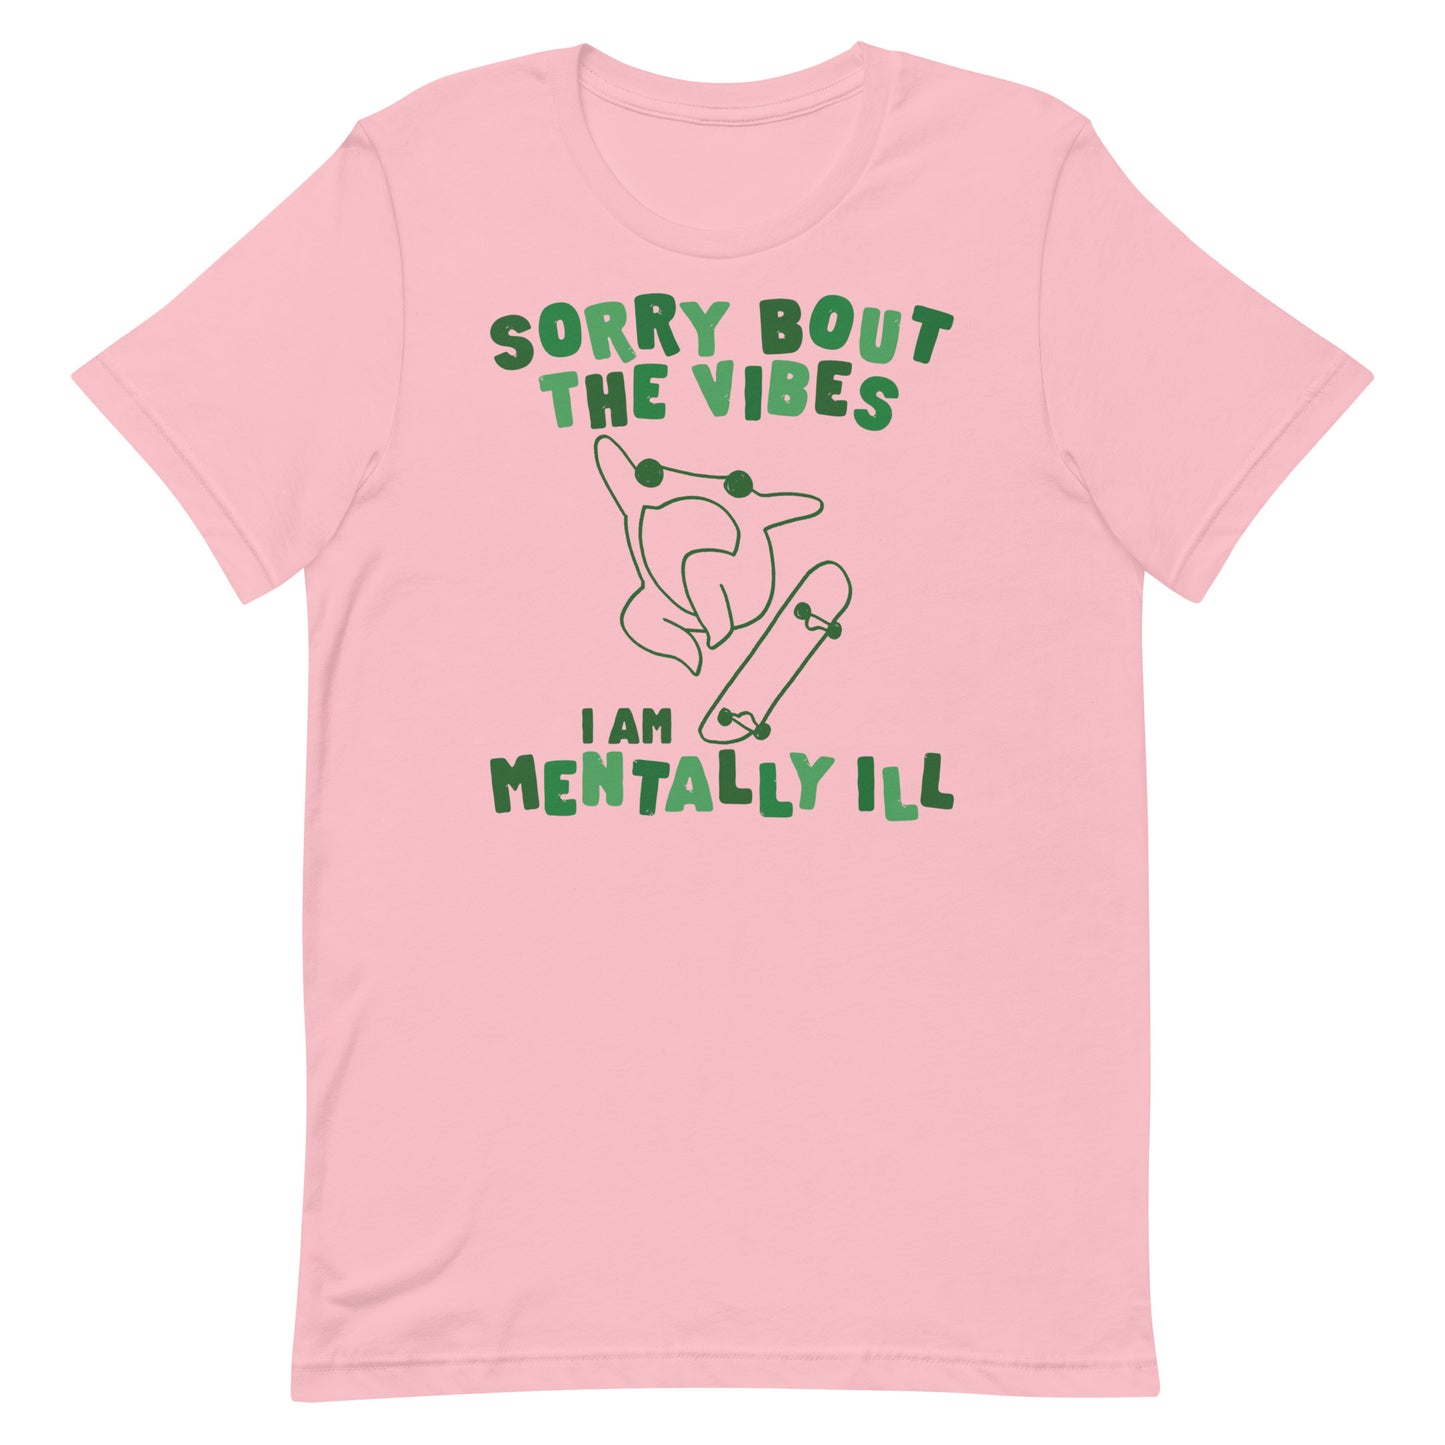 Sorry About The Vibes I'm Mentally Ill Unisex t-shirt